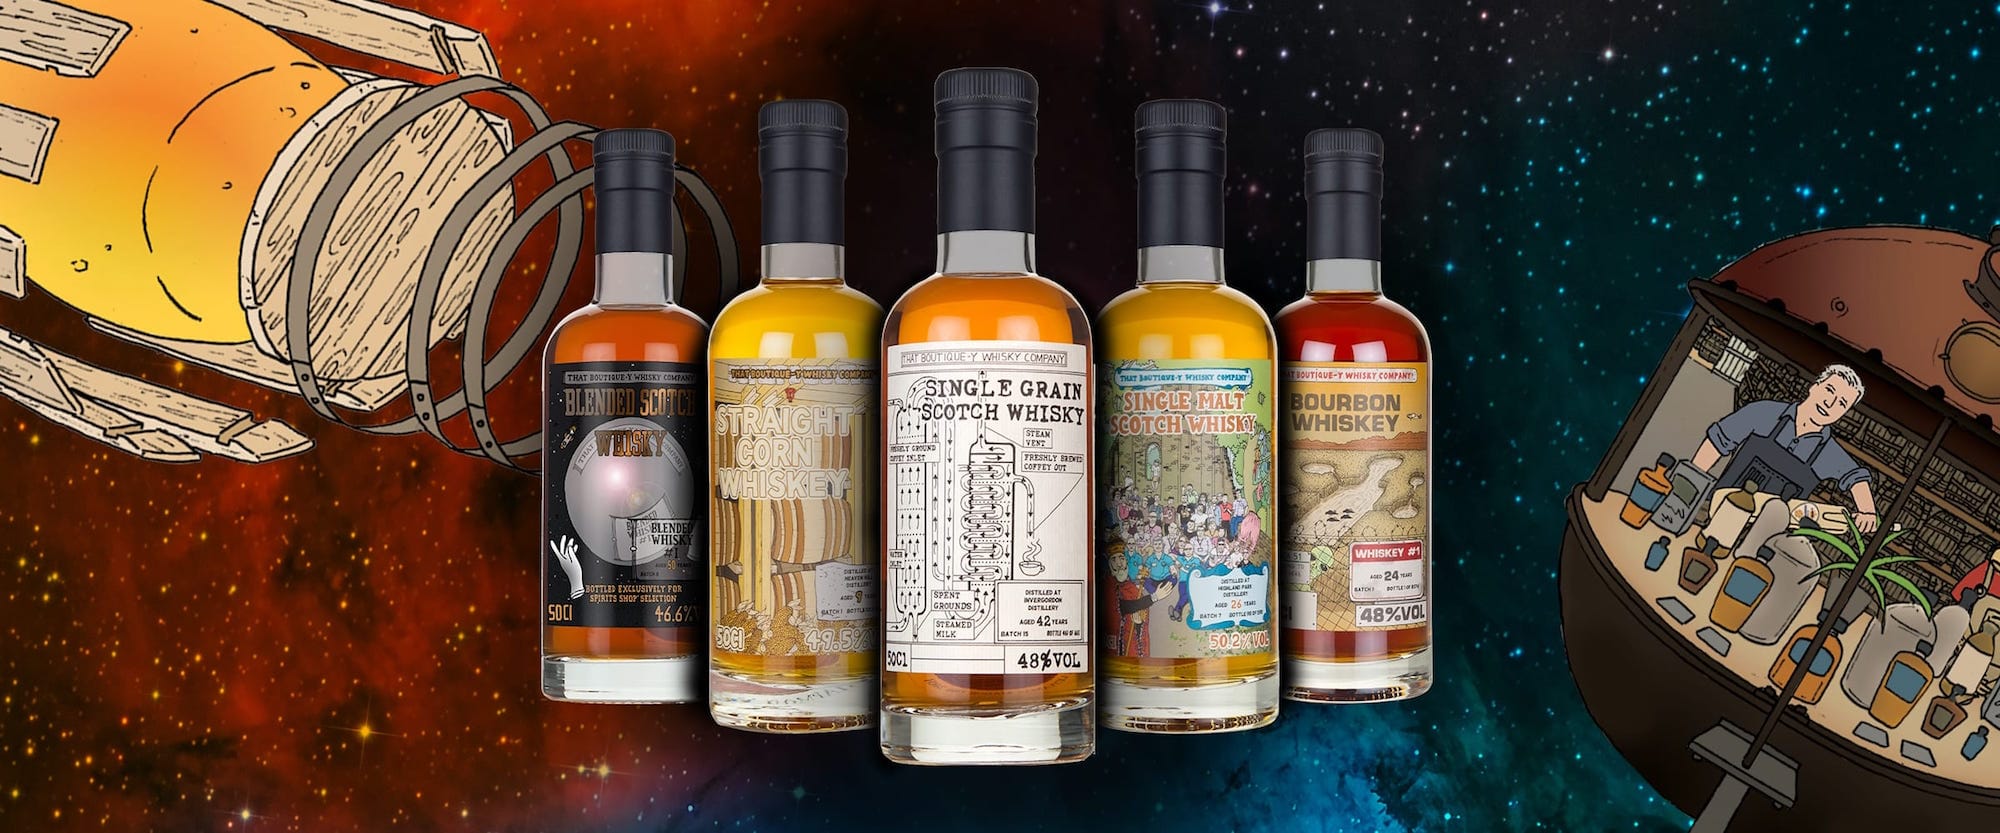 That Boutique-y Whisky Company Independent Bottlers of Single Cask Whiskies